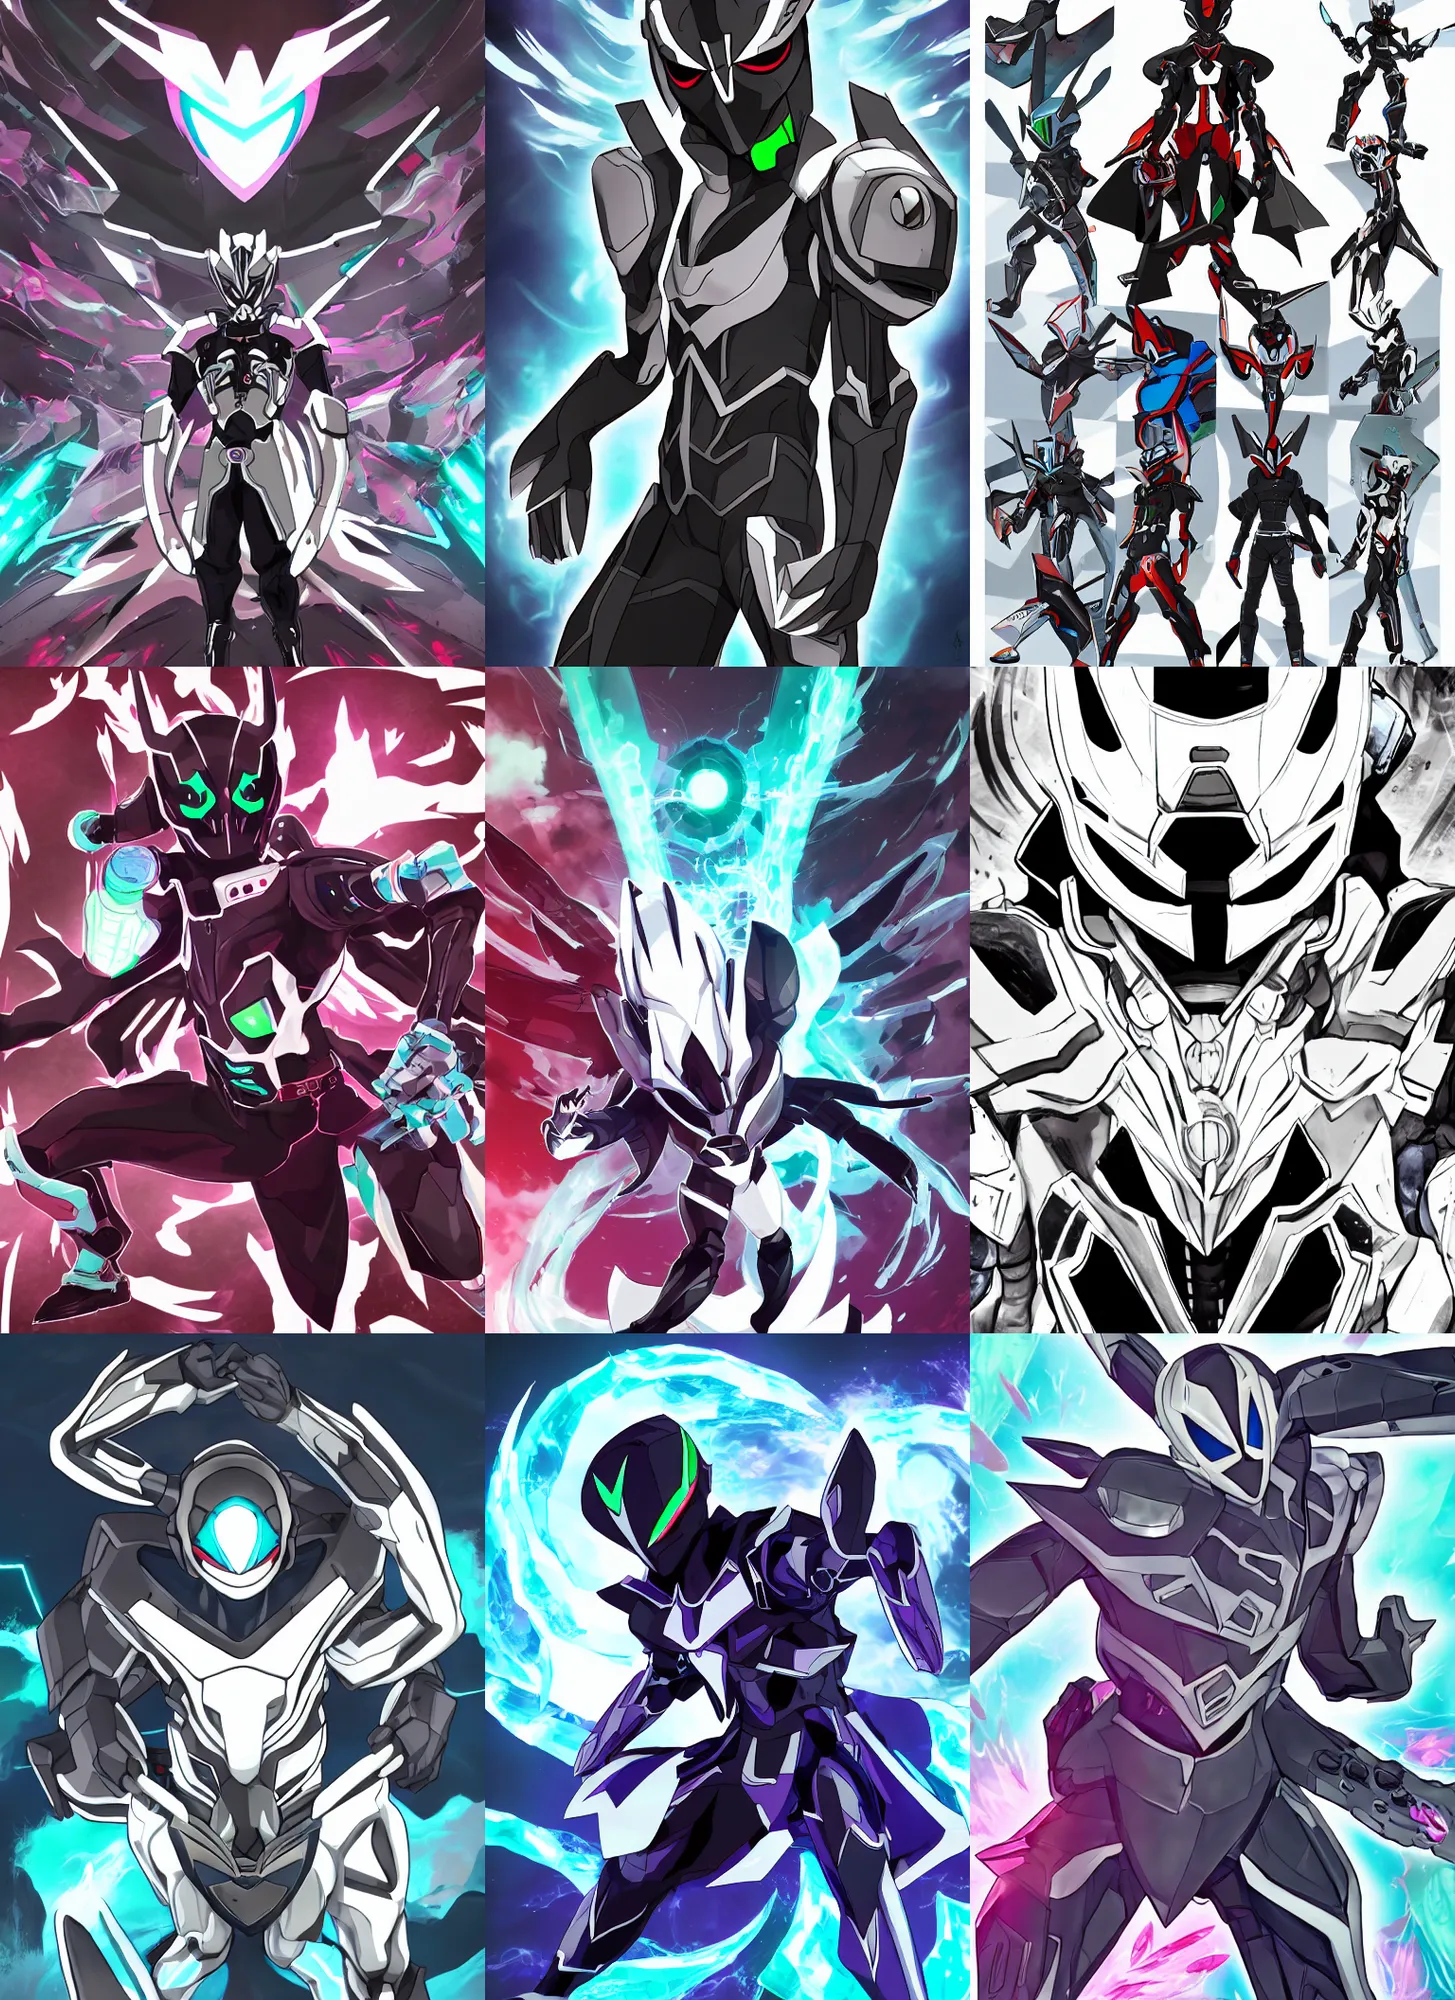 Prompt: illustrated character portrait of ghost kamen rider doing a henshin pose, league of legends splash art, kamen rider, kamen rider ghost, tokusatsu, in the style of studio trigger studio bones and production i. g., animation, anime illustration, studio trigger, studio bones, production i. g.